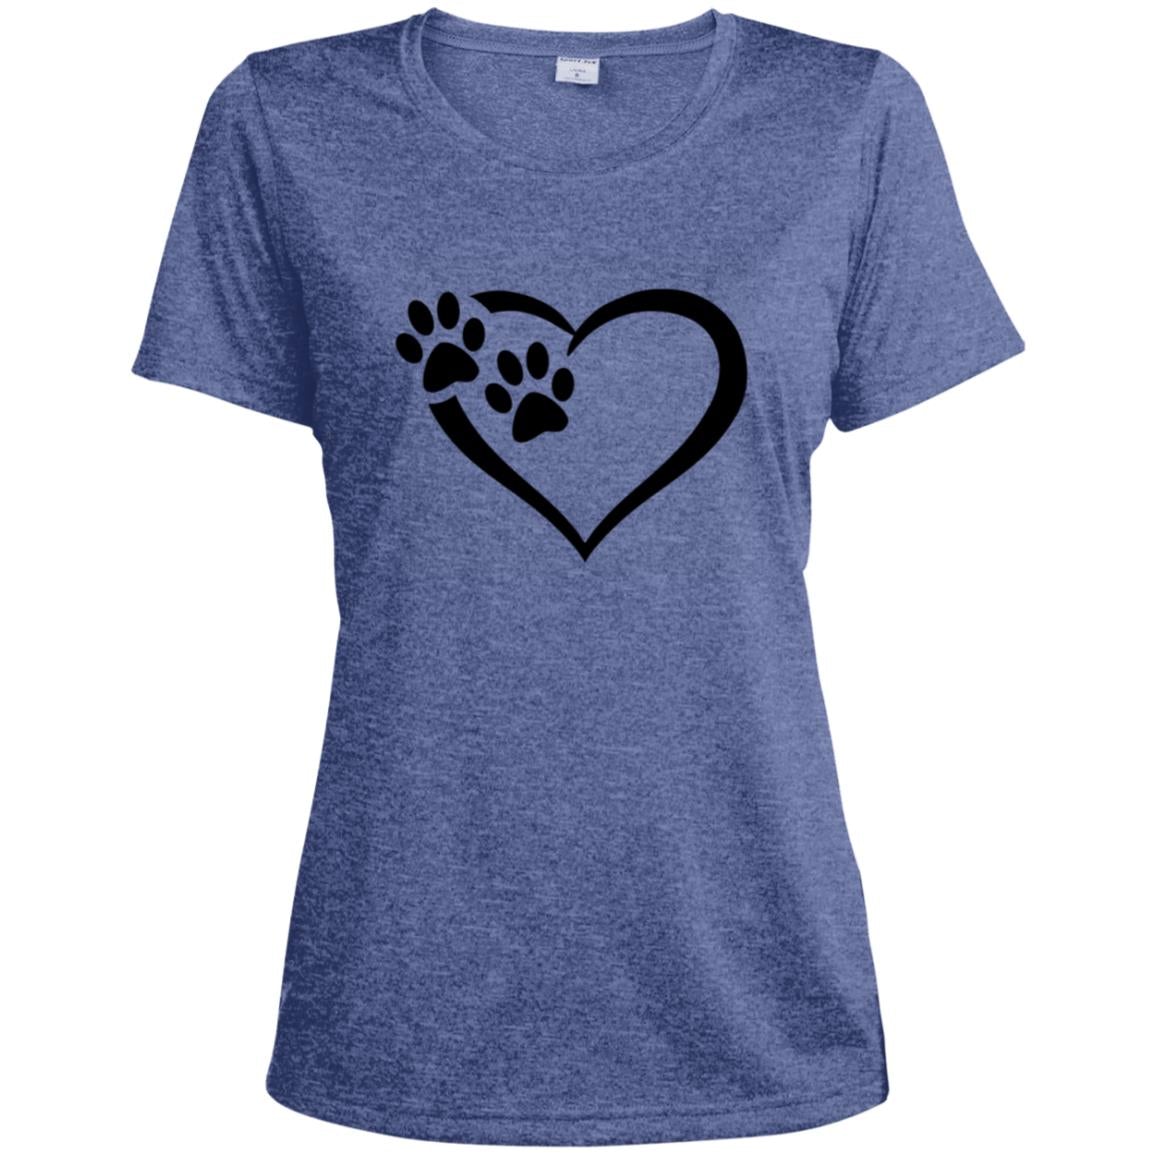 Women's Paws Of Passion T-Shirt True Royal Heather - Loyalty Vibes